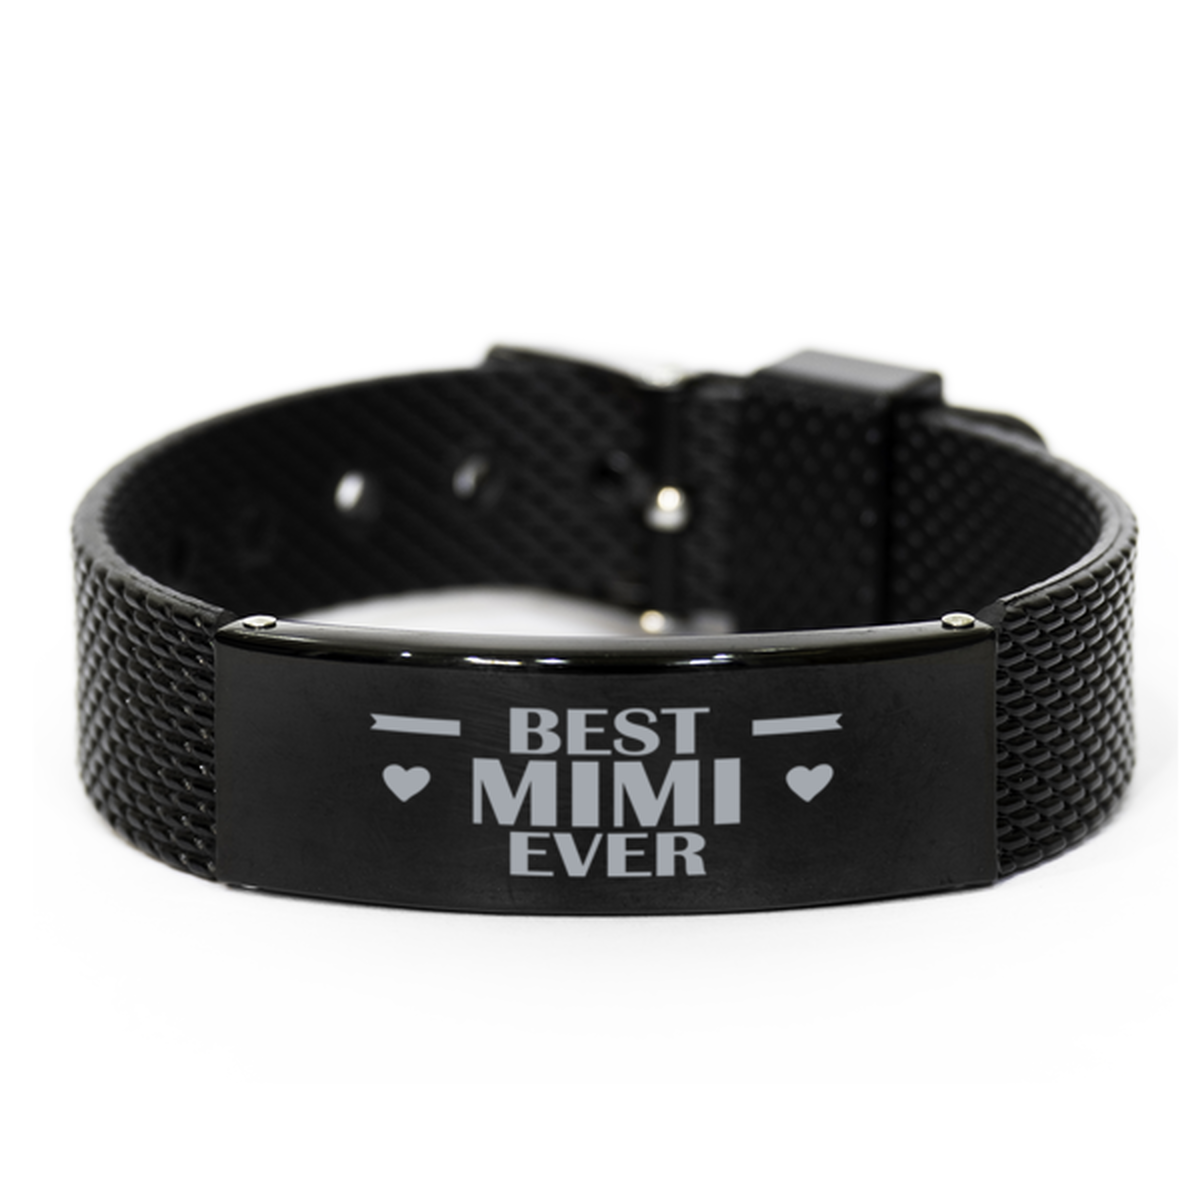 Best Mimi Ever Mimi Gifts, Gag Engraved Bracelet For Mimi, Best Family Gifts For Women